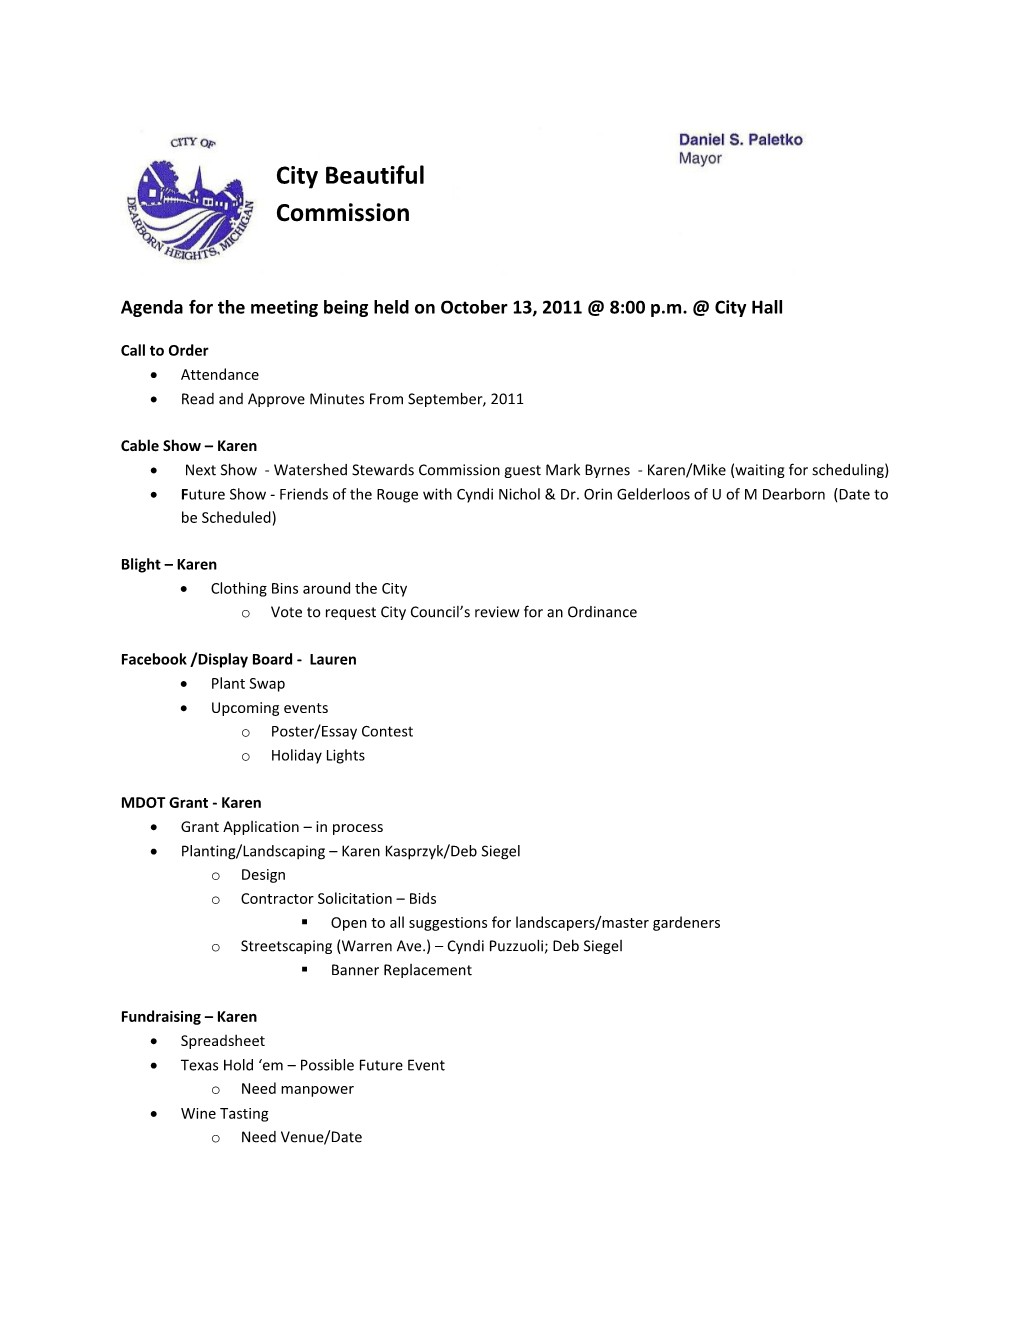 Agenda for the Meeting Being Held on October 13, 2011 8:00 P.M. City Hall